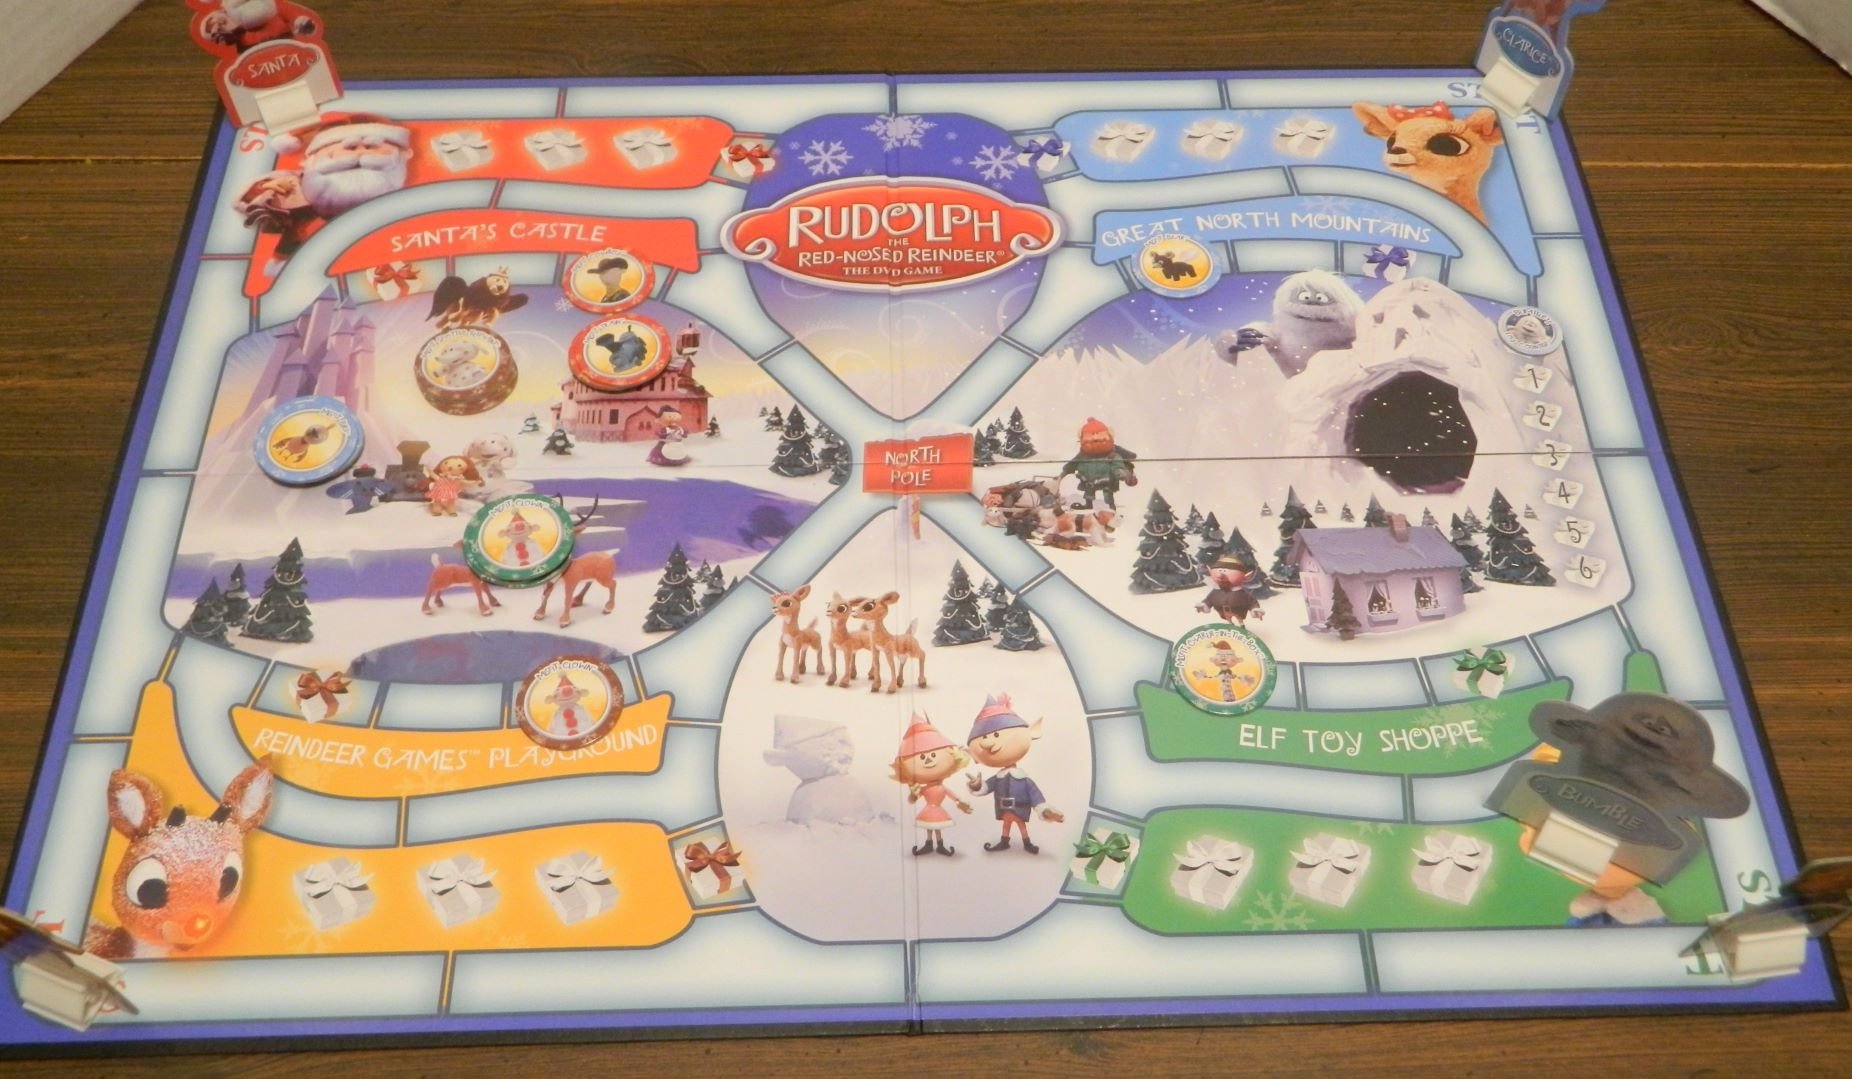 Rudolph The Red Nosed Reindeer The Dvd Game Review And Rules Geeky Hobbies,Rudolph The Red Nosed Reindeer 1964 Characters